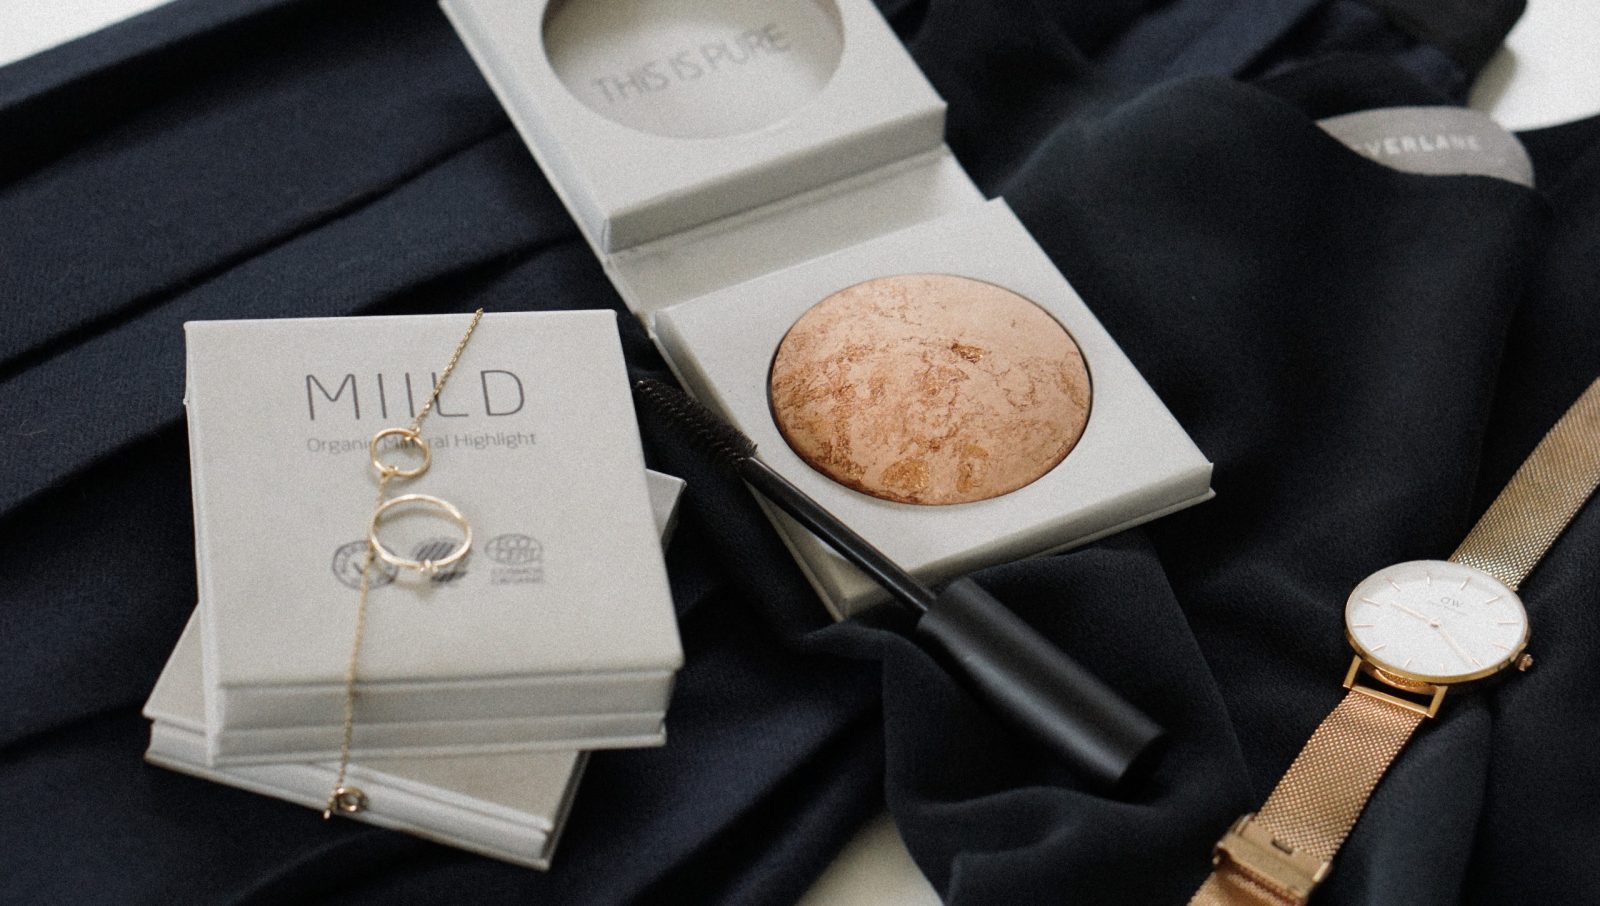 Miild: still my favourite makeup brand (and now available in Germany!)